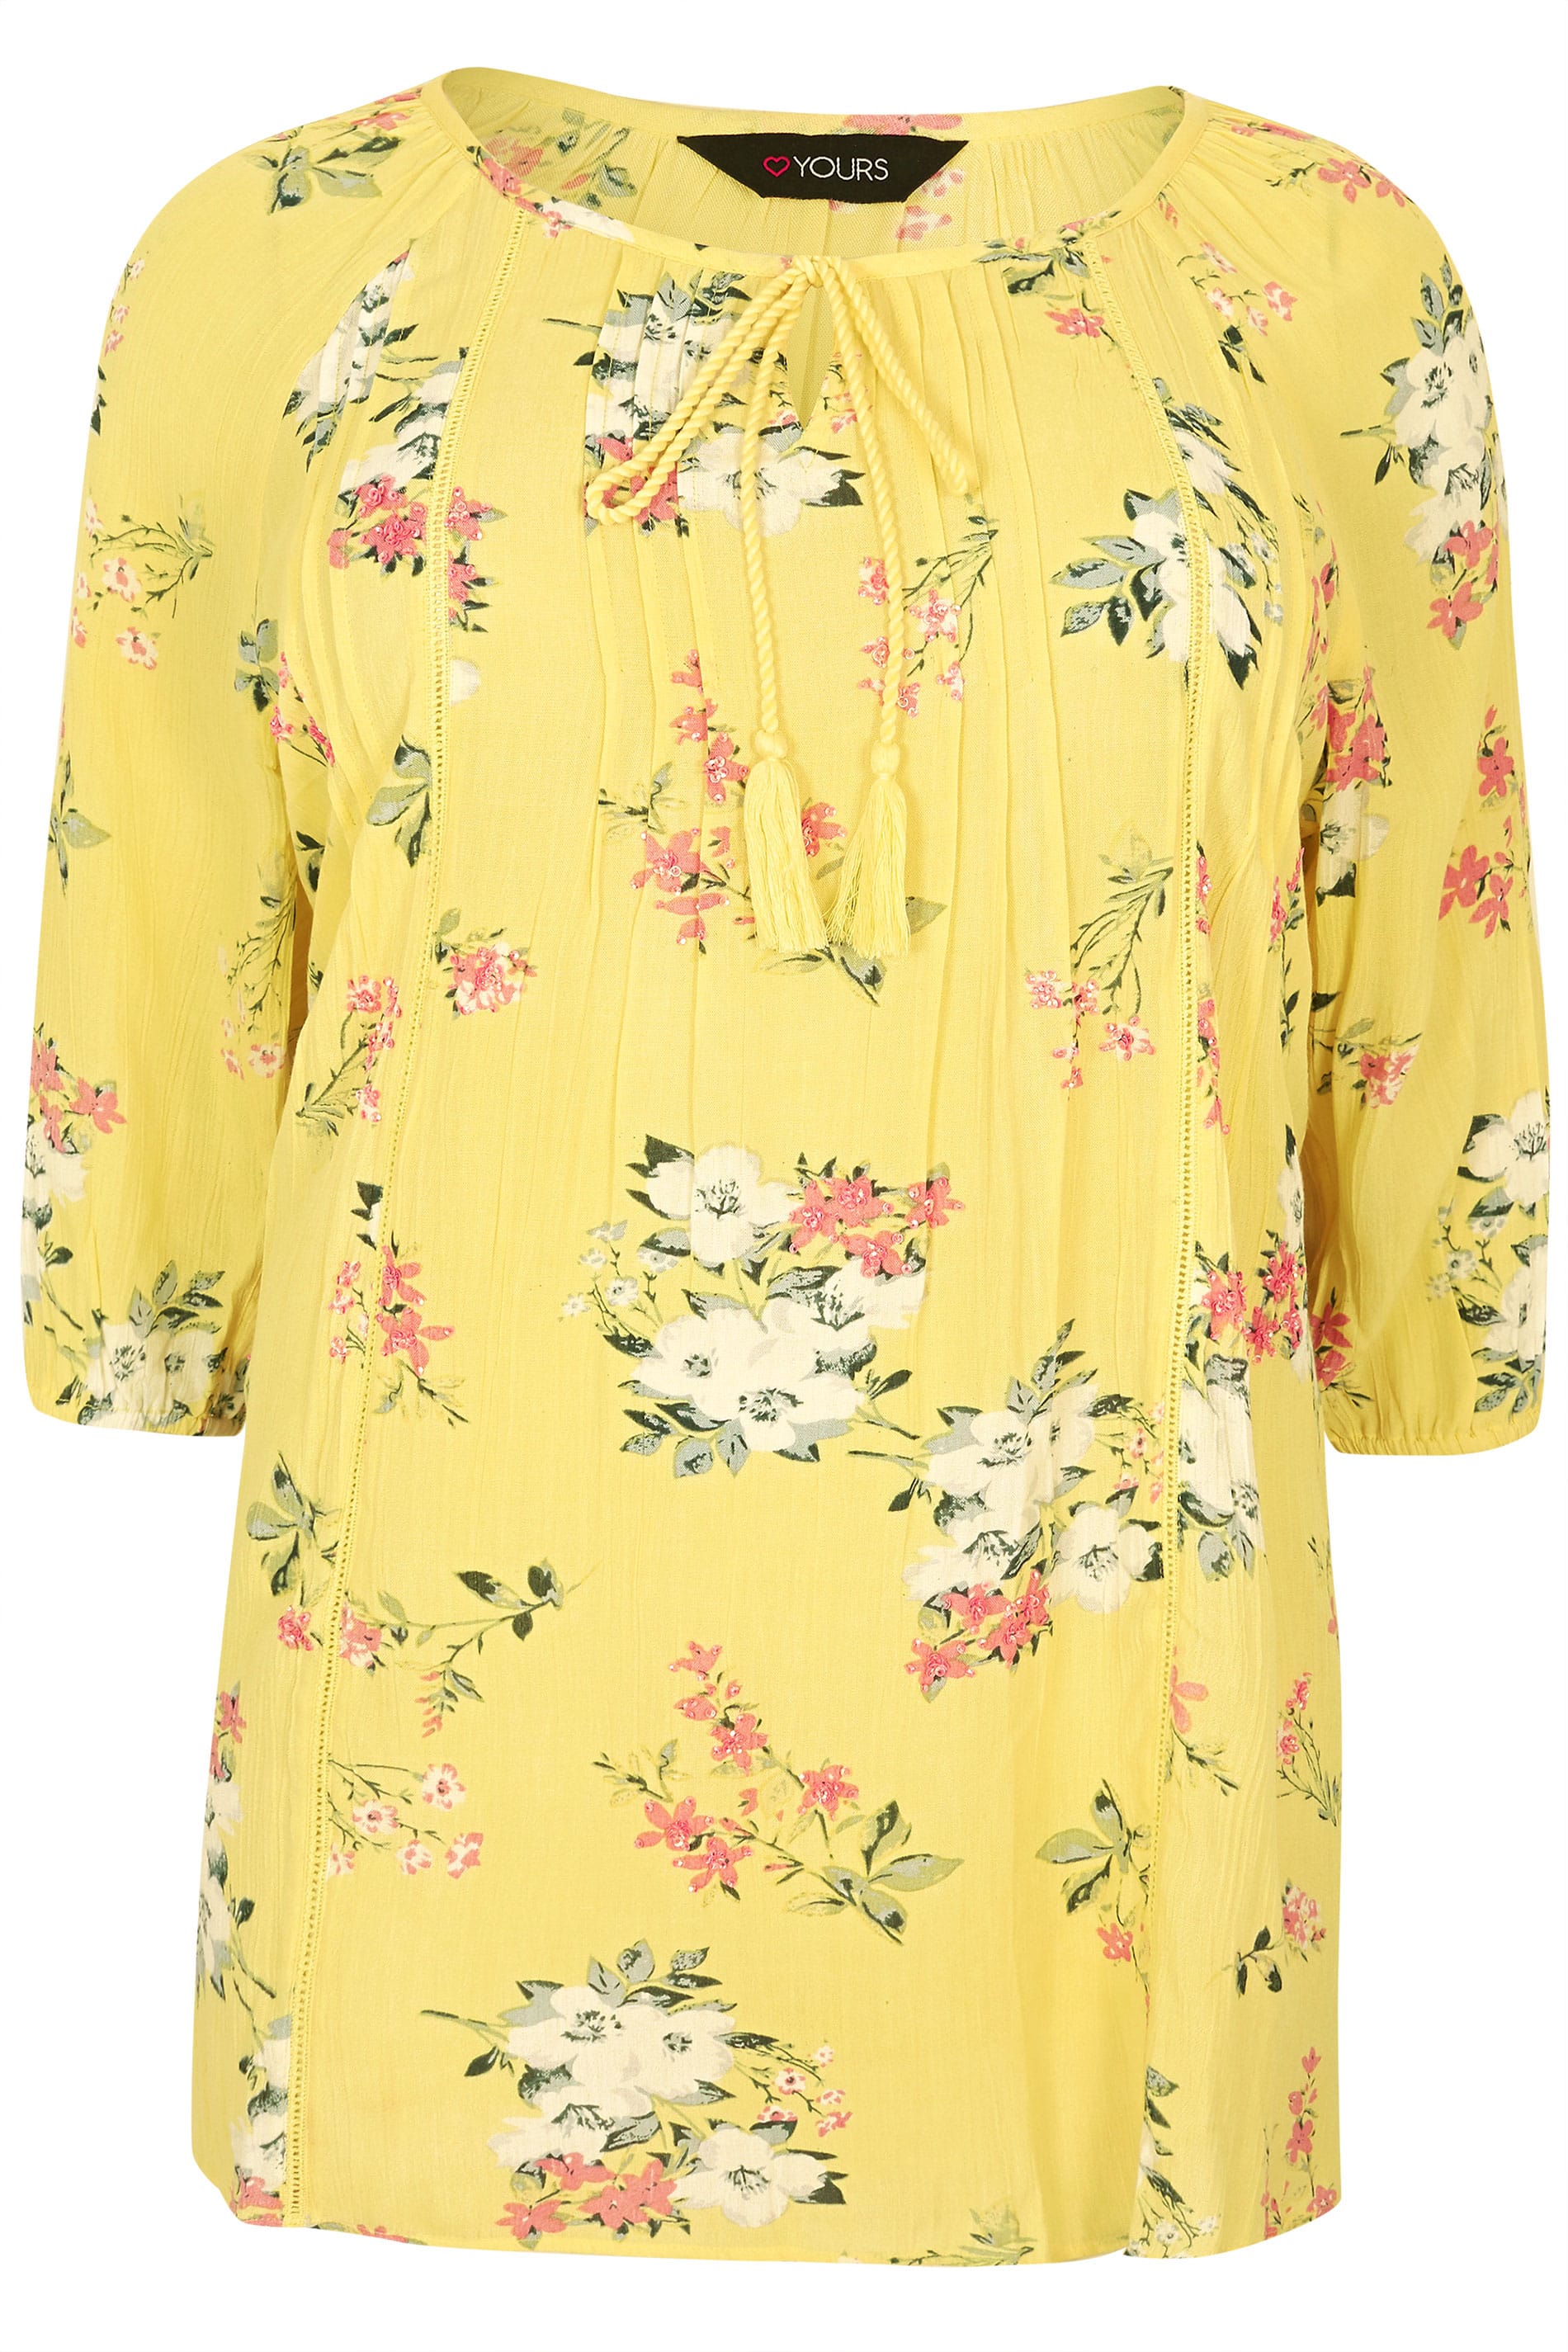 Plus Size Yellow Floral Gypsy Top Sizes 16 To 36 Yours